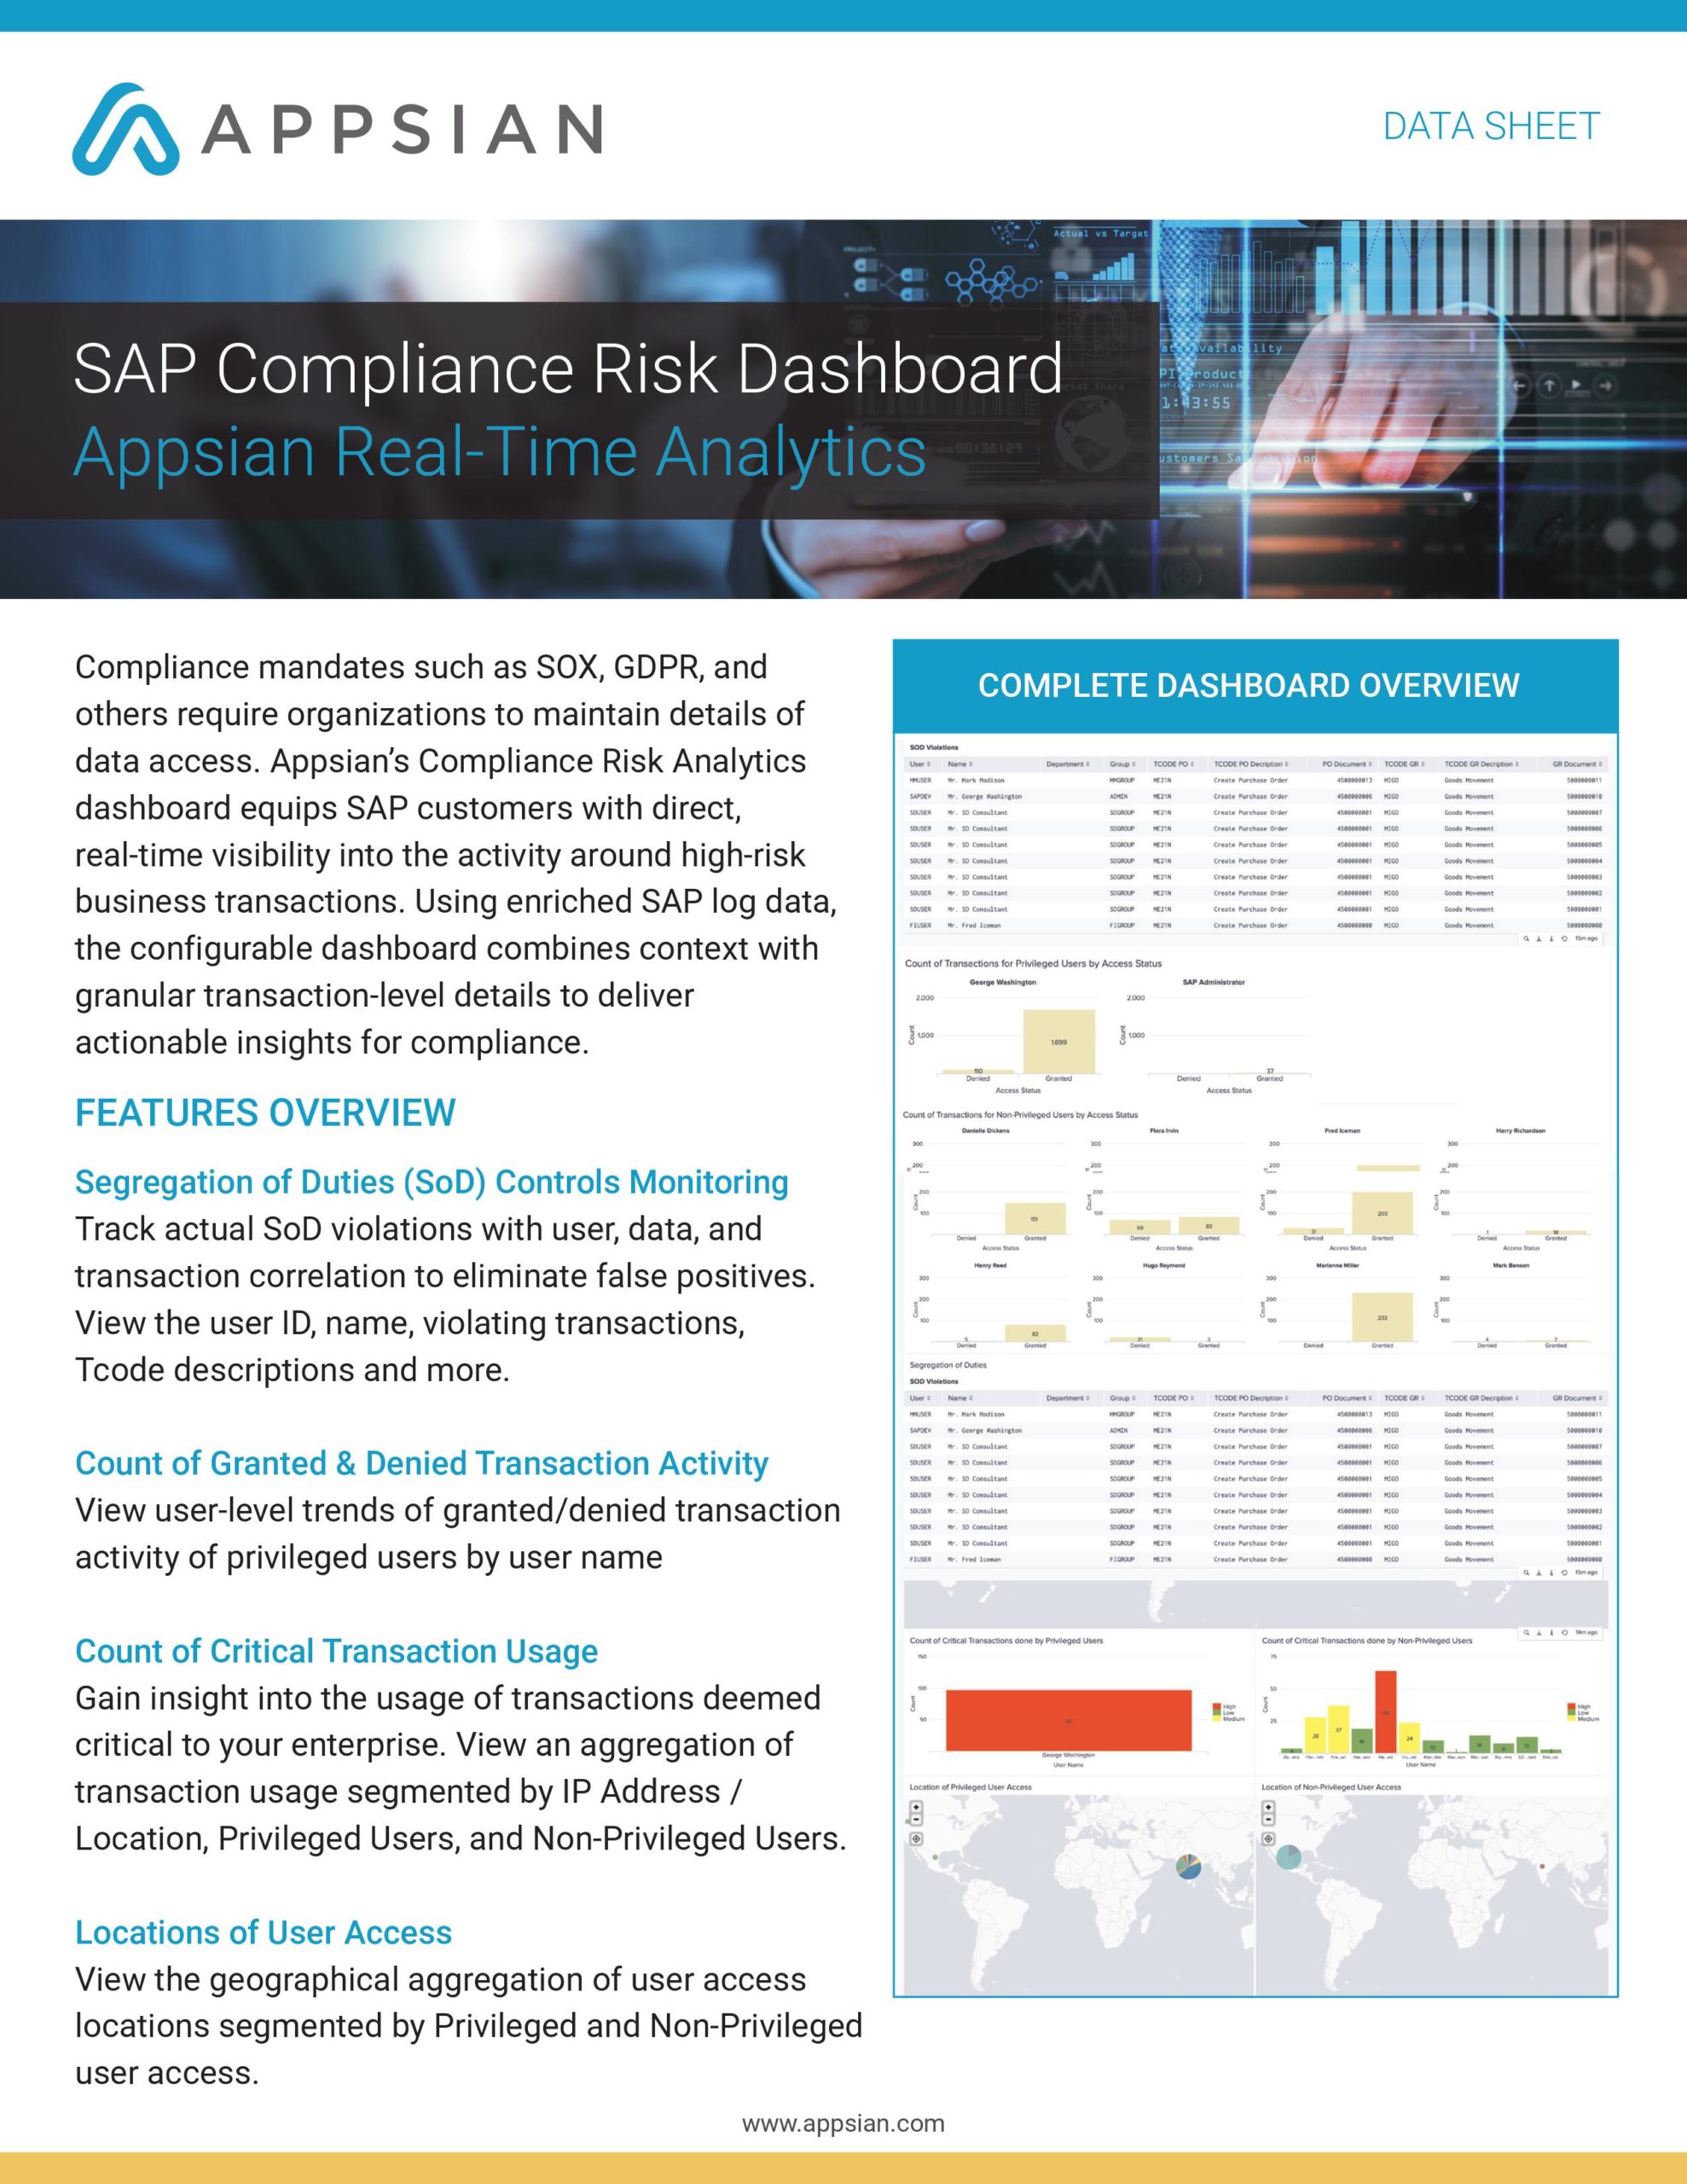 How to Uncover SAP Compliance Risks in Real-Time